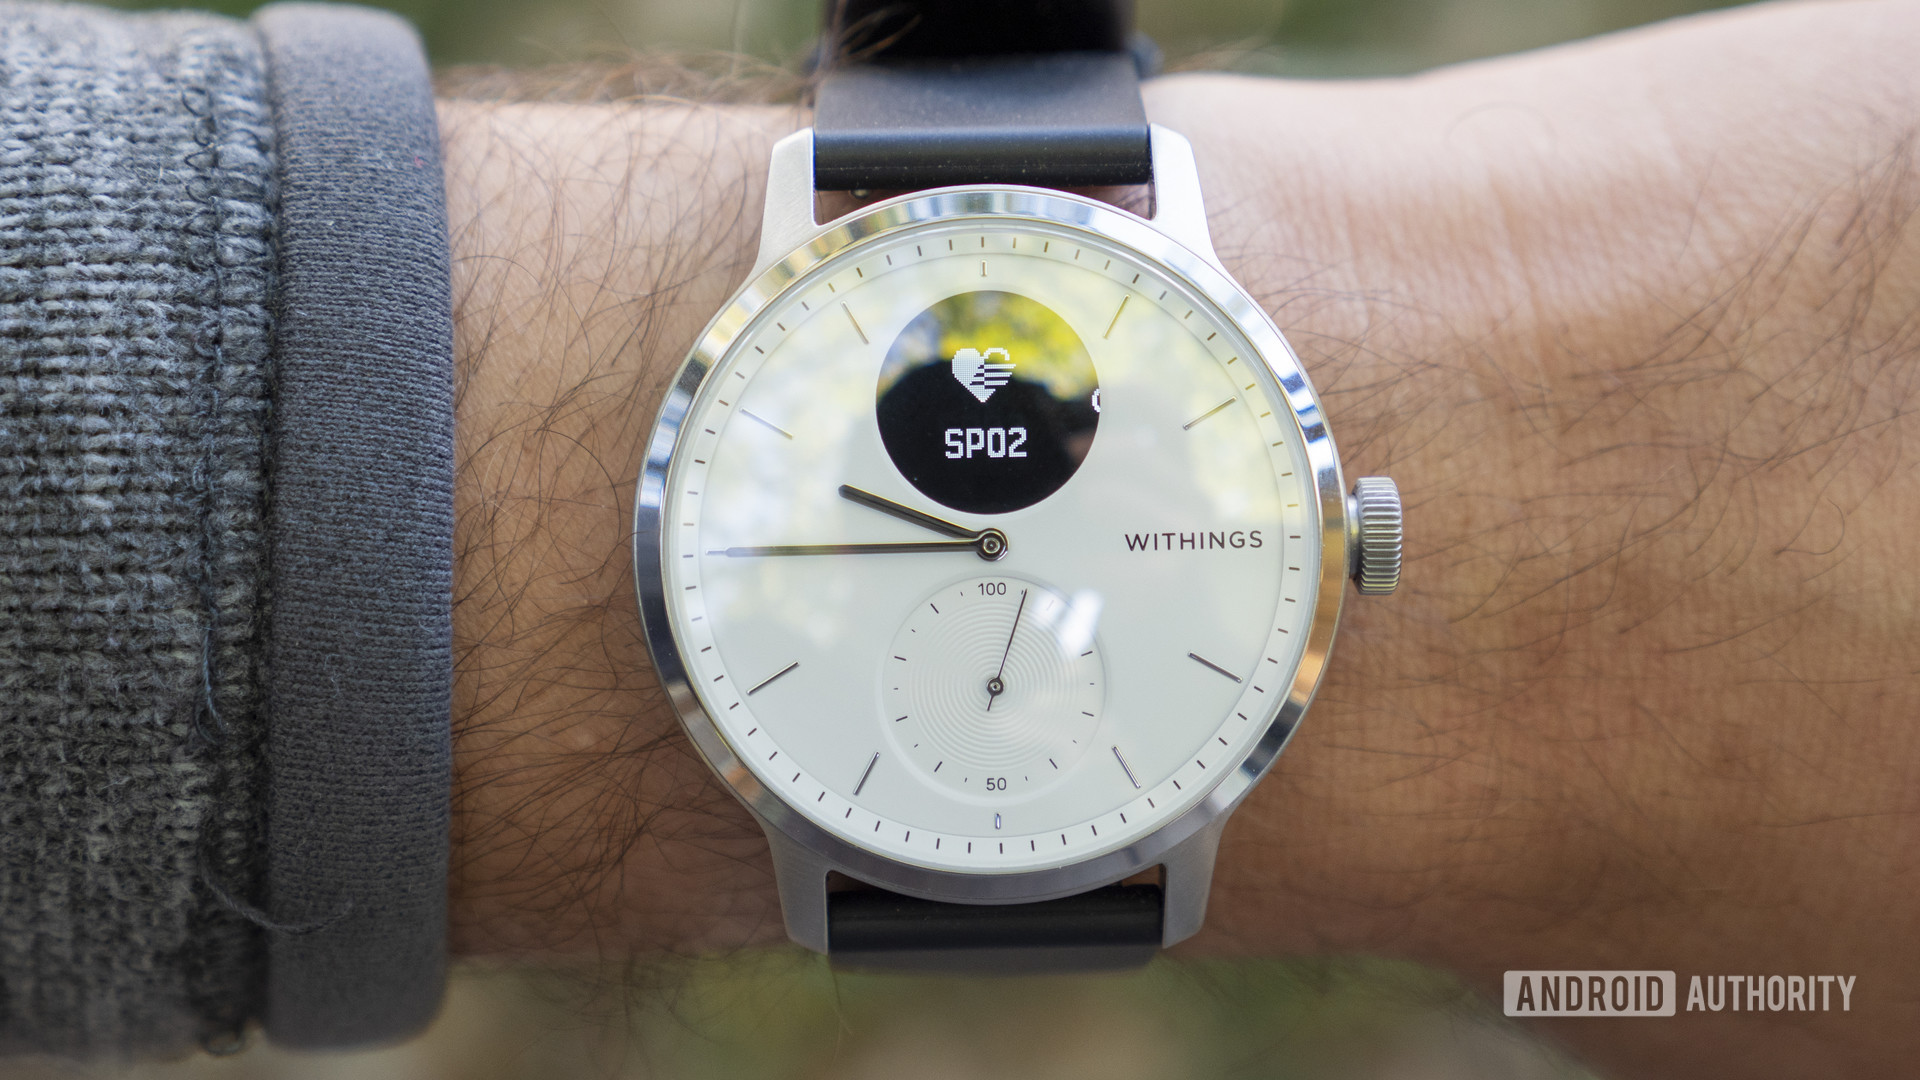 A Withings Scanwatch on a user's wrist displays the the SpO2 feature.